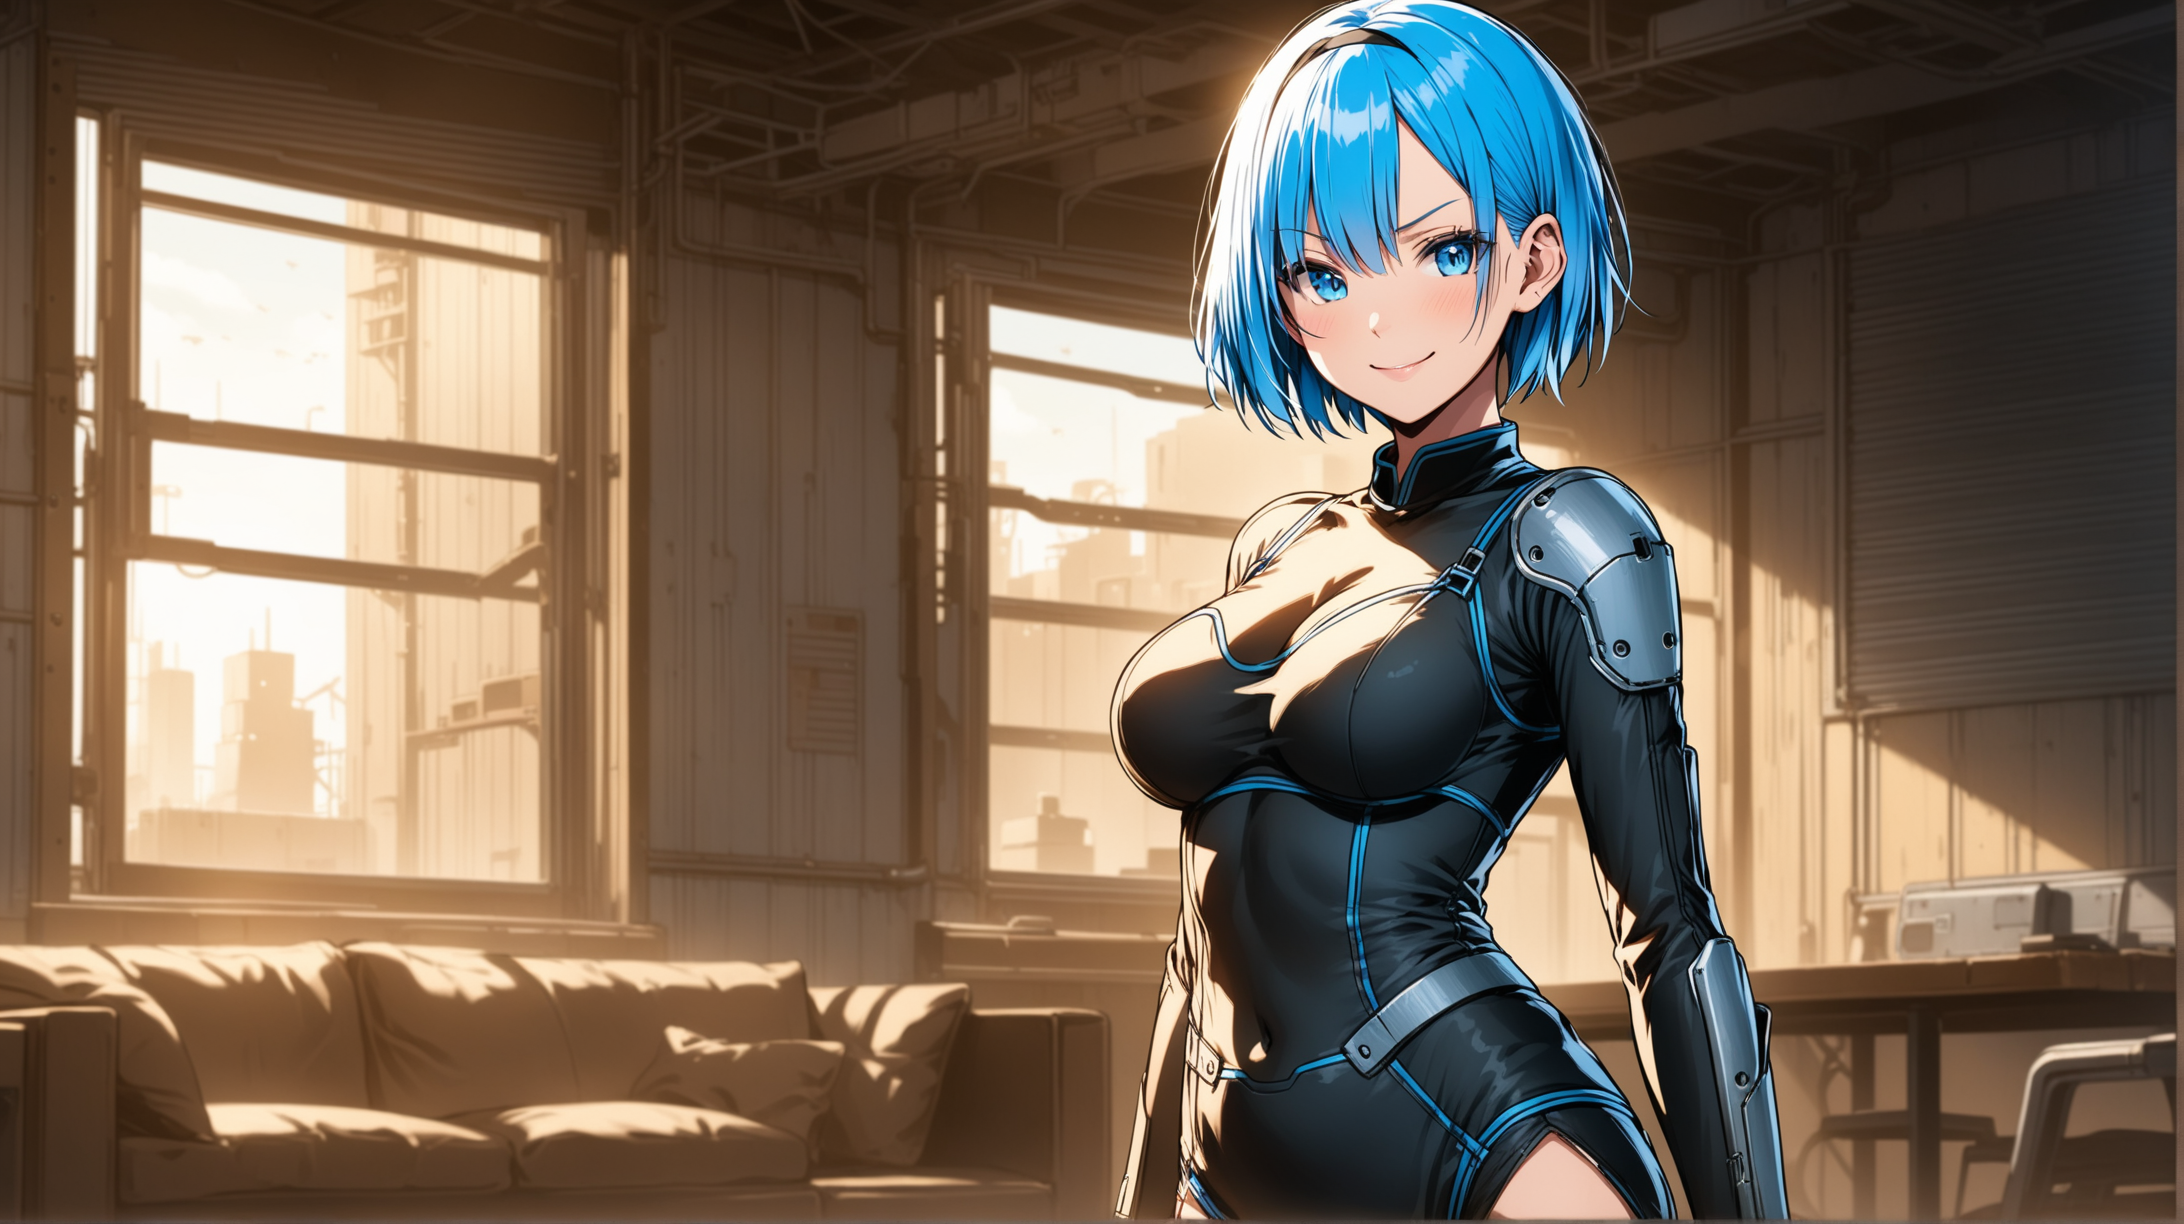 Draw the character Rem, high quality, in a confident pose, indoors, wearing an outfit inspired from the Fallout series, smiling at the viewer